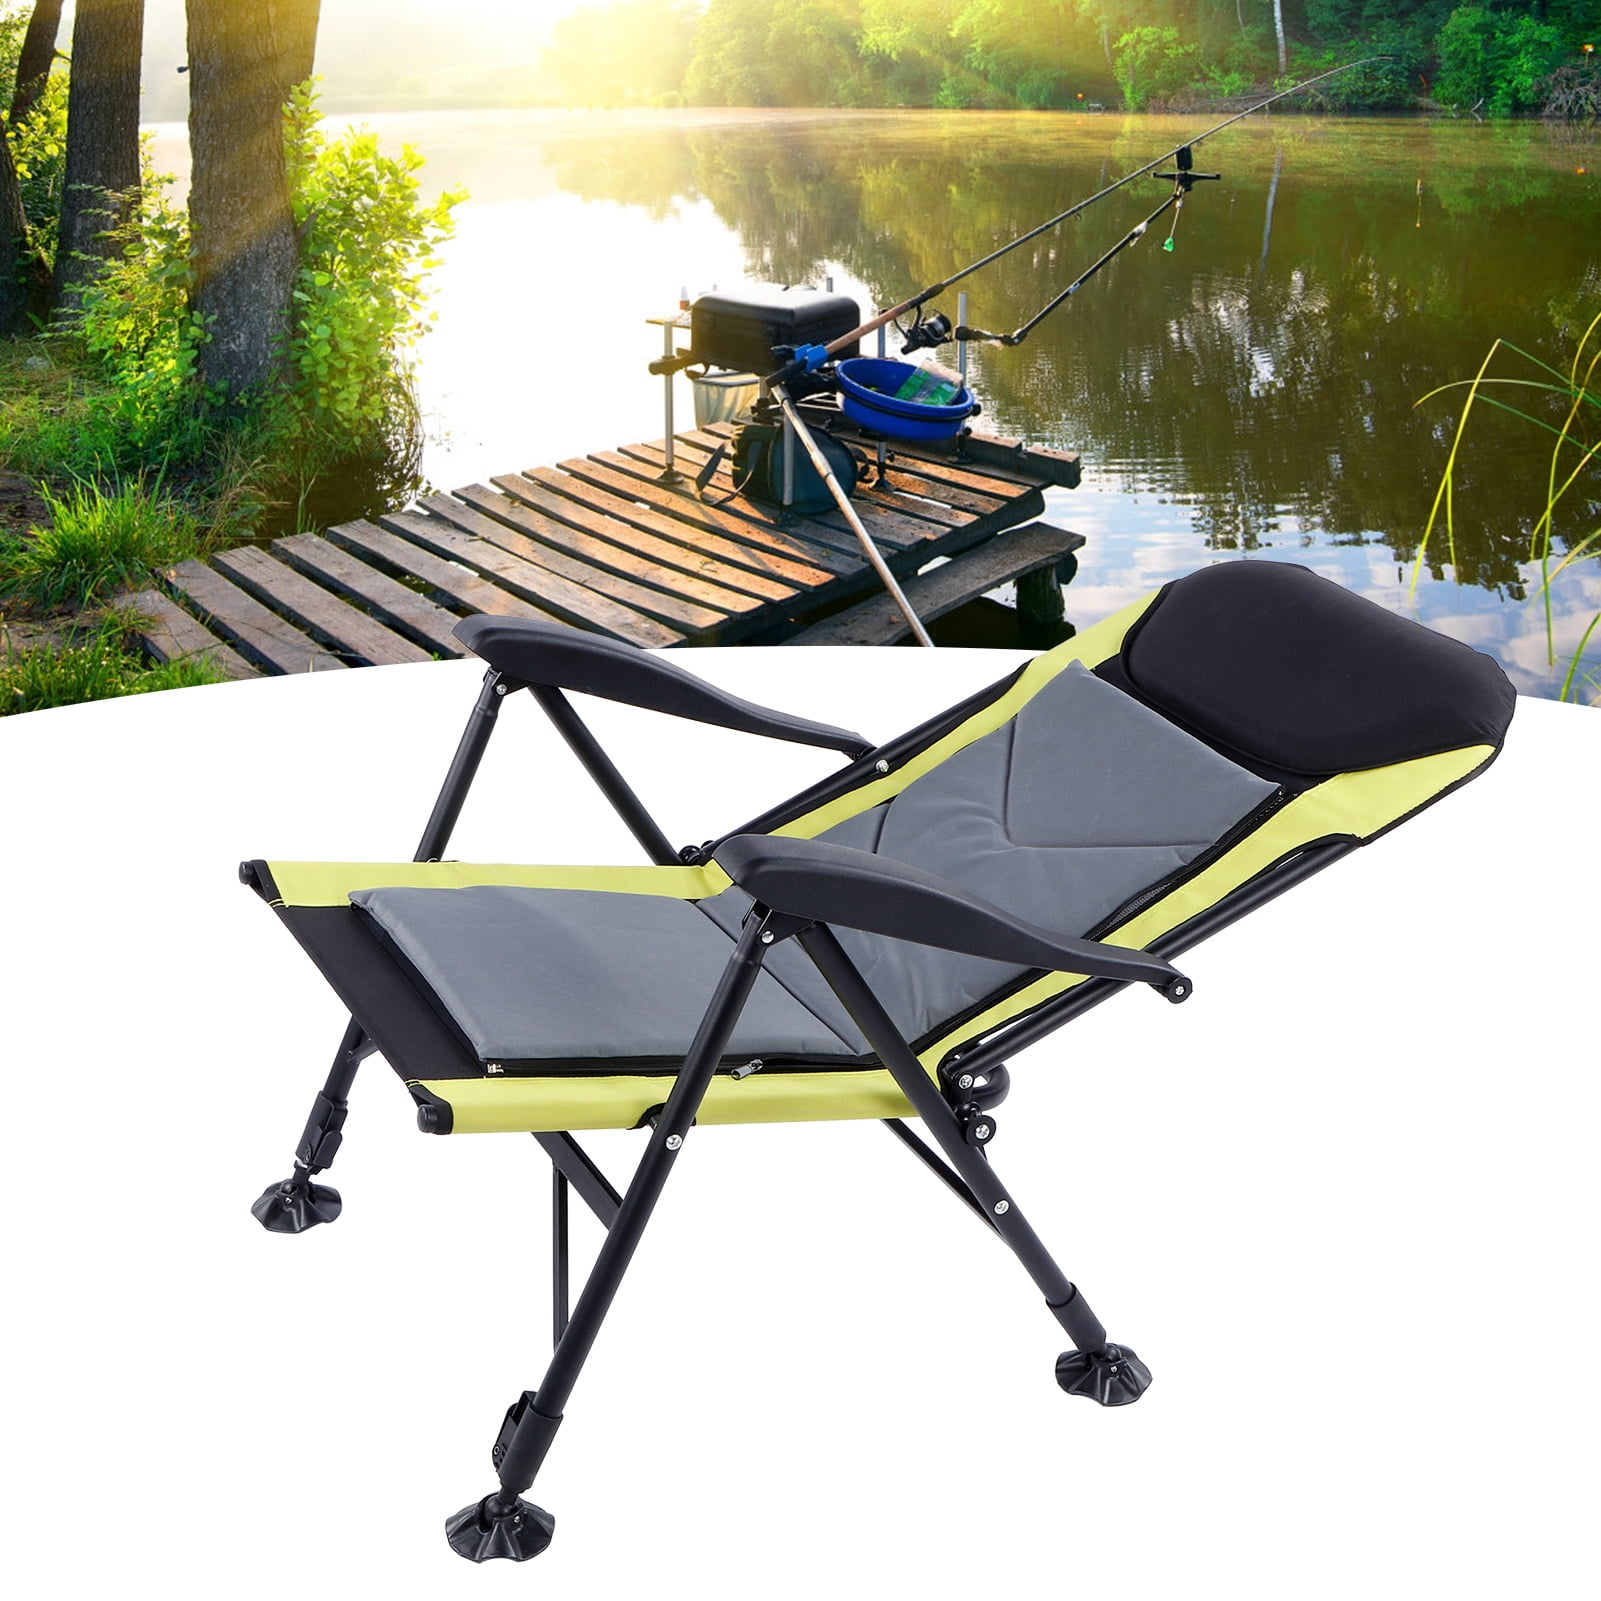 Camping Folding Chair Festival Hiking Finishing Garden Indoor Outdoor Seat 210KG 